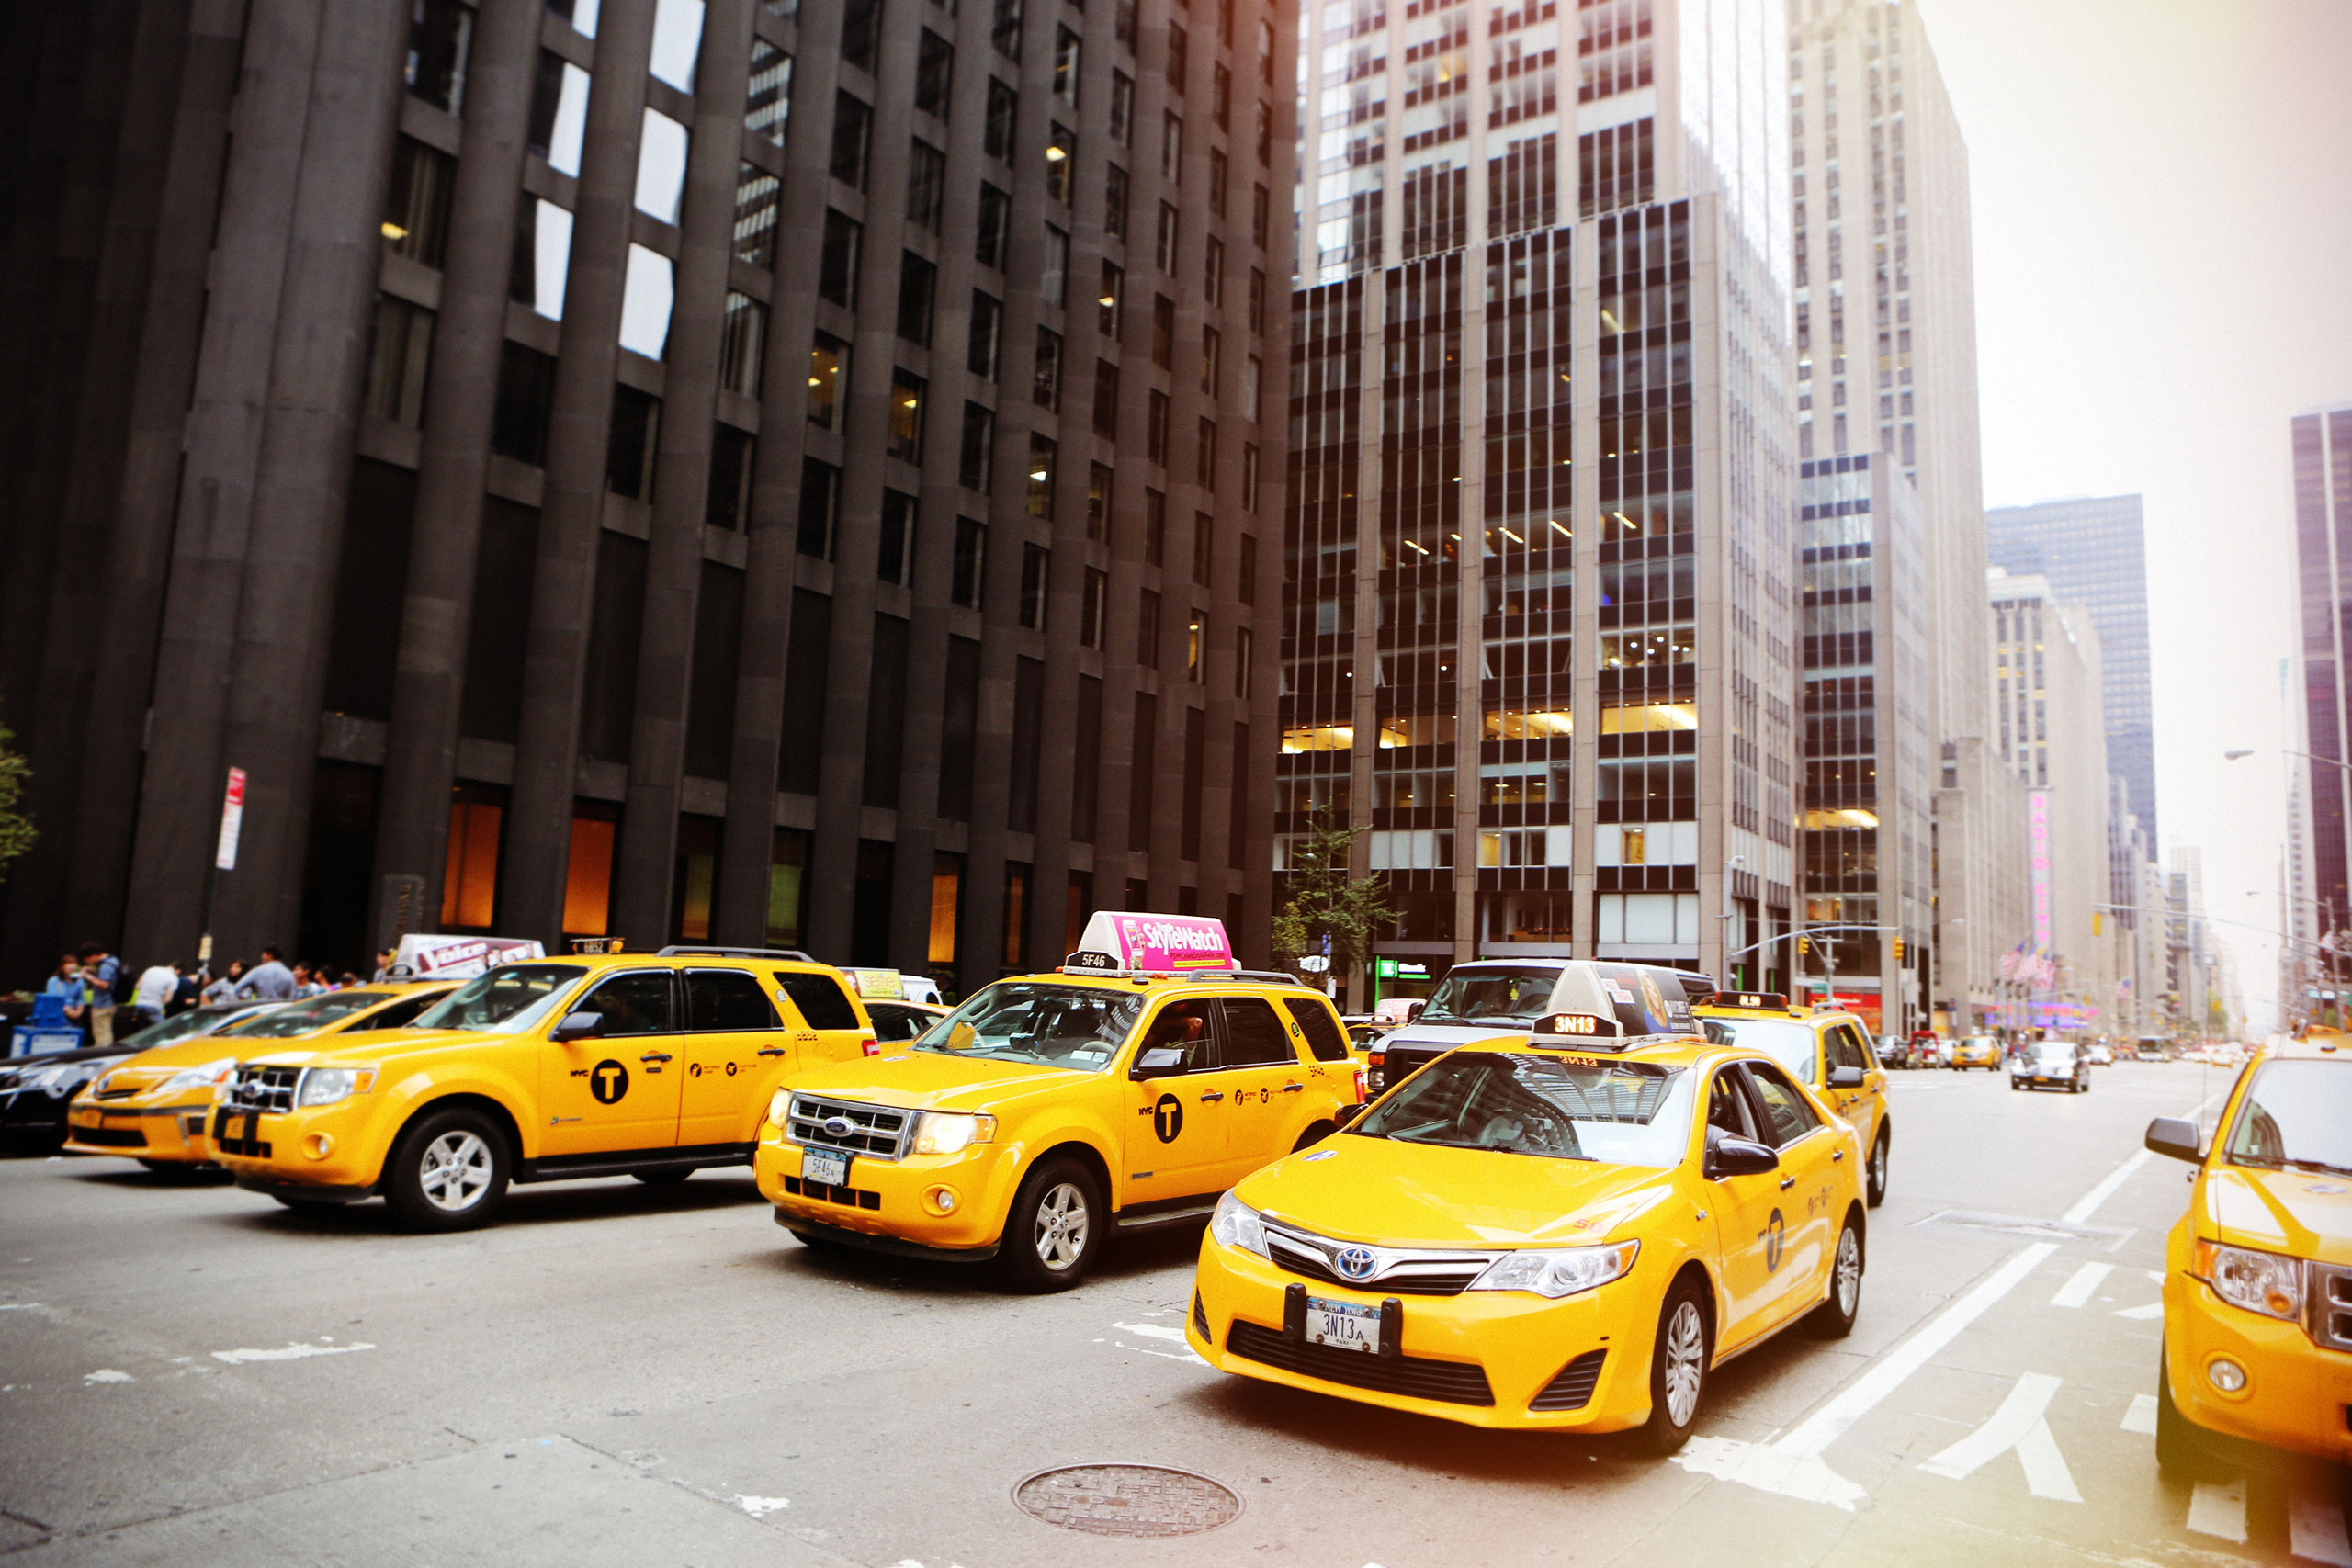 cabs-cars-city-8247